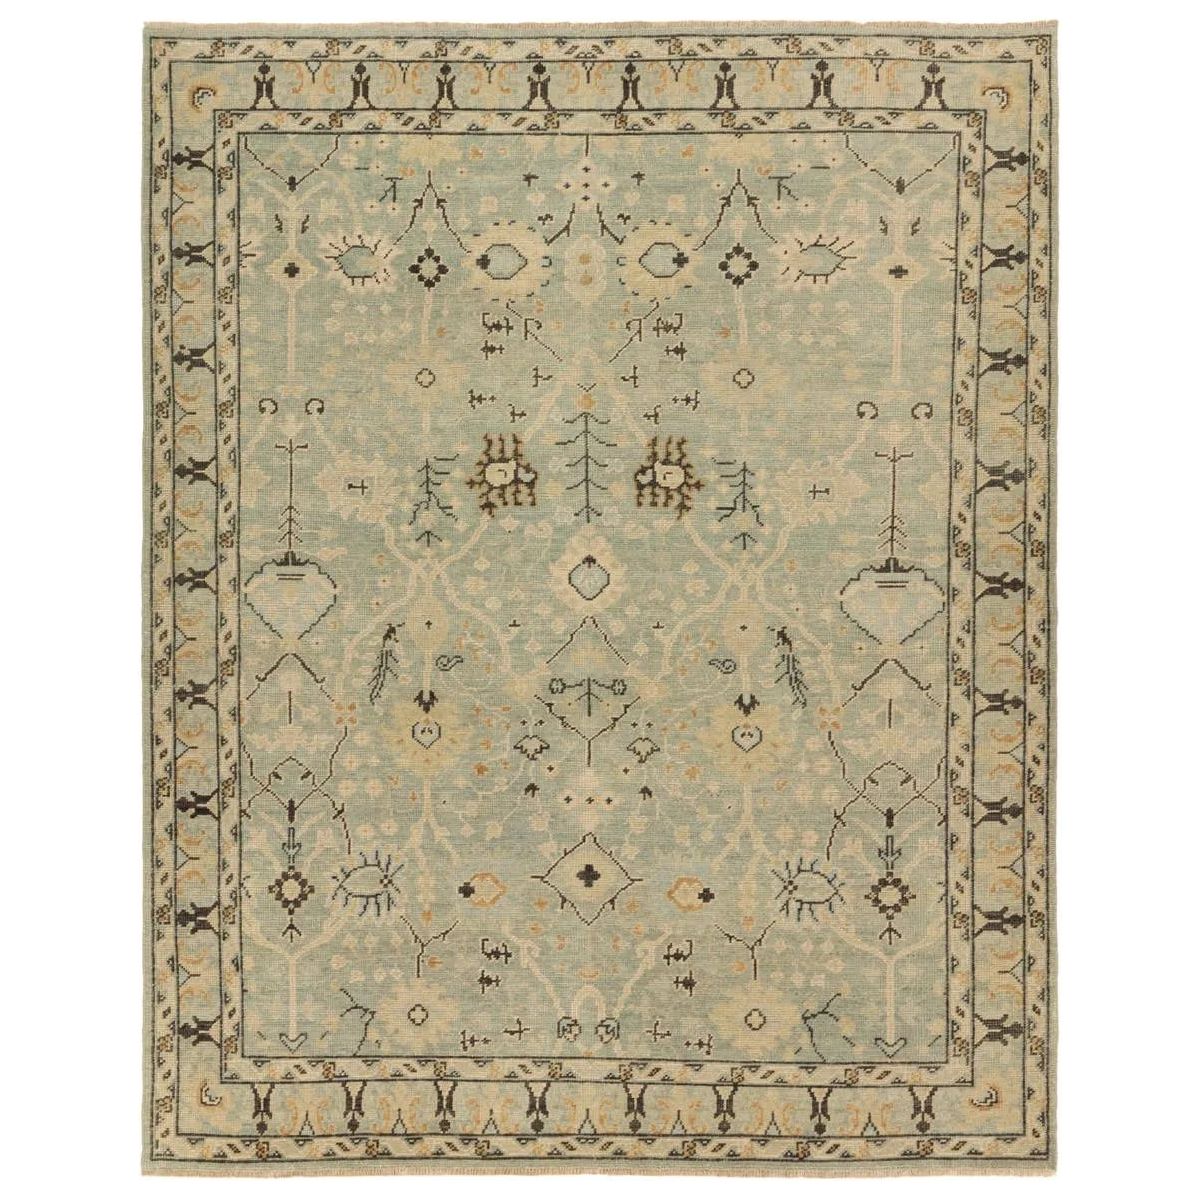 The Rhapsody Markid features heirloom-quality designs of stunningly abrashed Old World patterns. The Markid area rug boasts a beautifully distressed floral and Oushak motif with a decorative border. The light blue and tan tones are accented with black and beige hues for added depth and intrigue. Amethyst Home provides interior design, new home construction design consulting, vintage area rugs, and lighting in the Des Moines metro area.